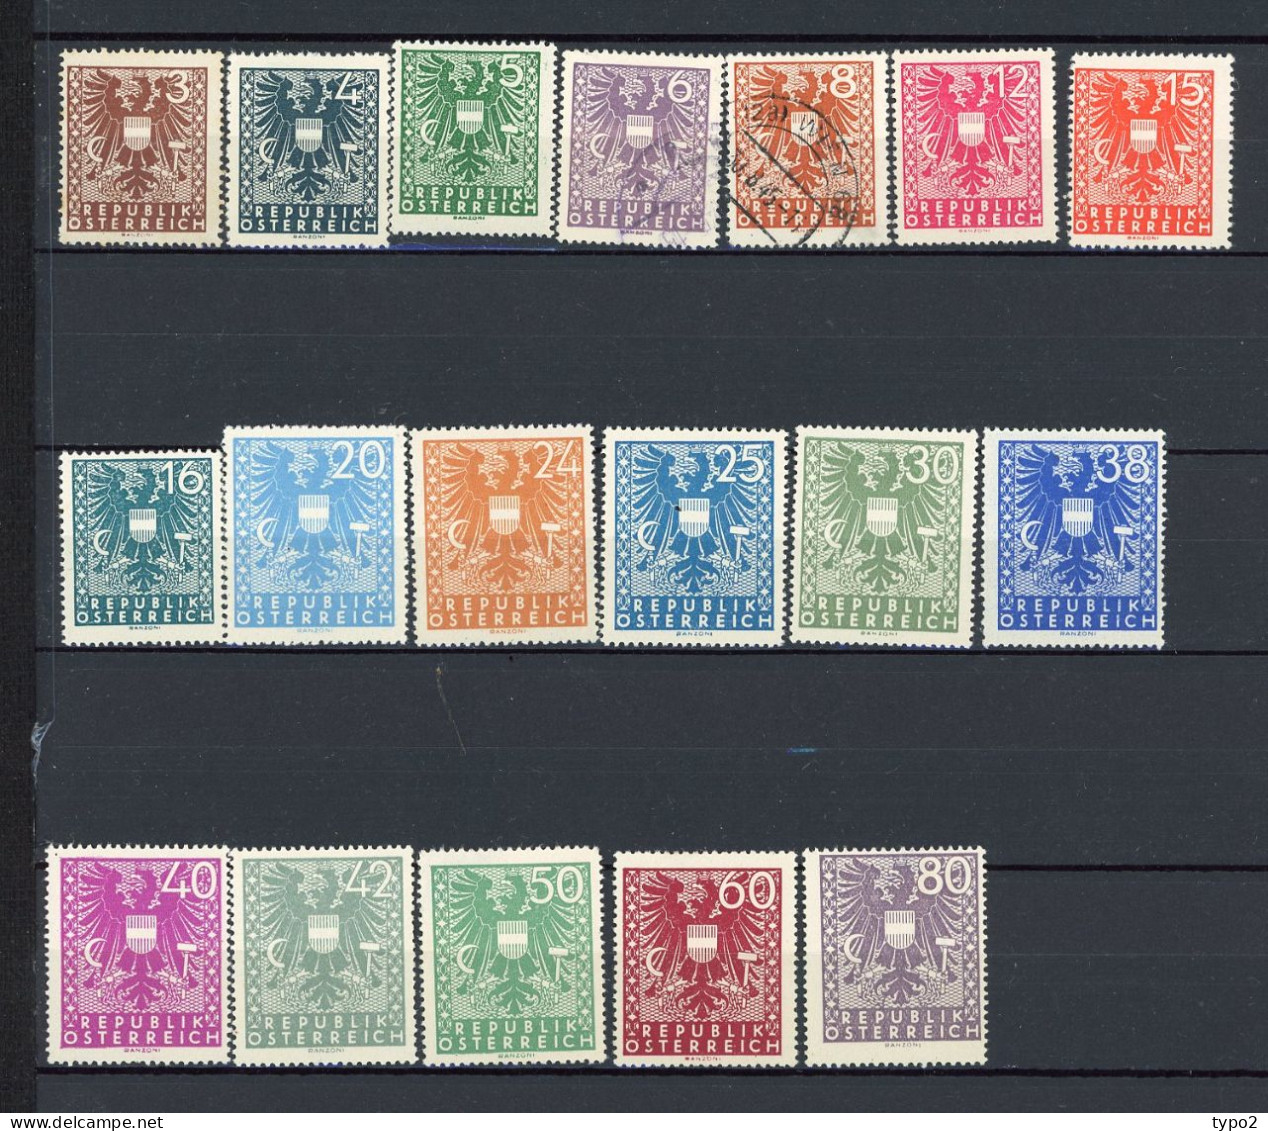 AUTRICHE - 1945  Yv. N° 577 à 595 Manque Le 582 (10p)  * / (o) Armoiries  Cote  2,7  Euro  BE  2 Scans - Unused Stamps